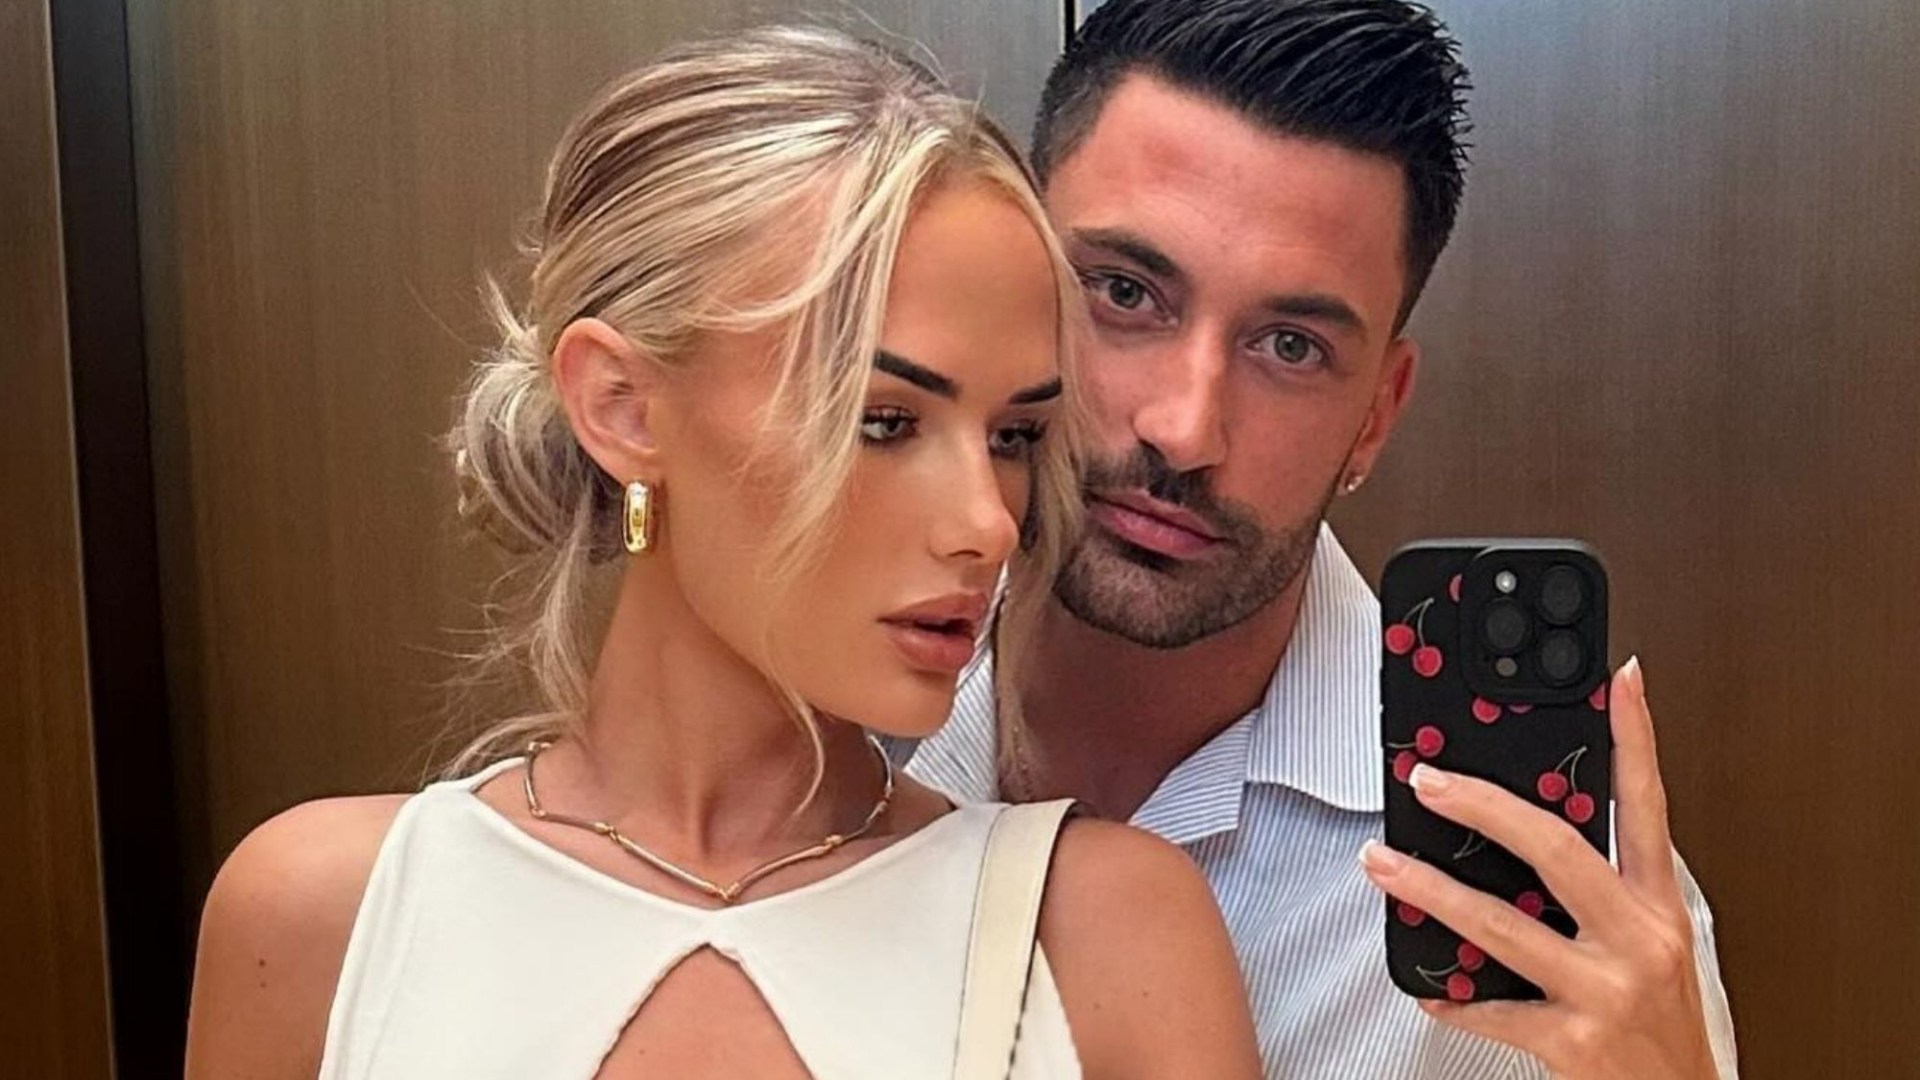 Inside Strictlys Giovanni Pernices Dubai holiday with stunning girlfriend Molly Brown as he declares I love you [Video]